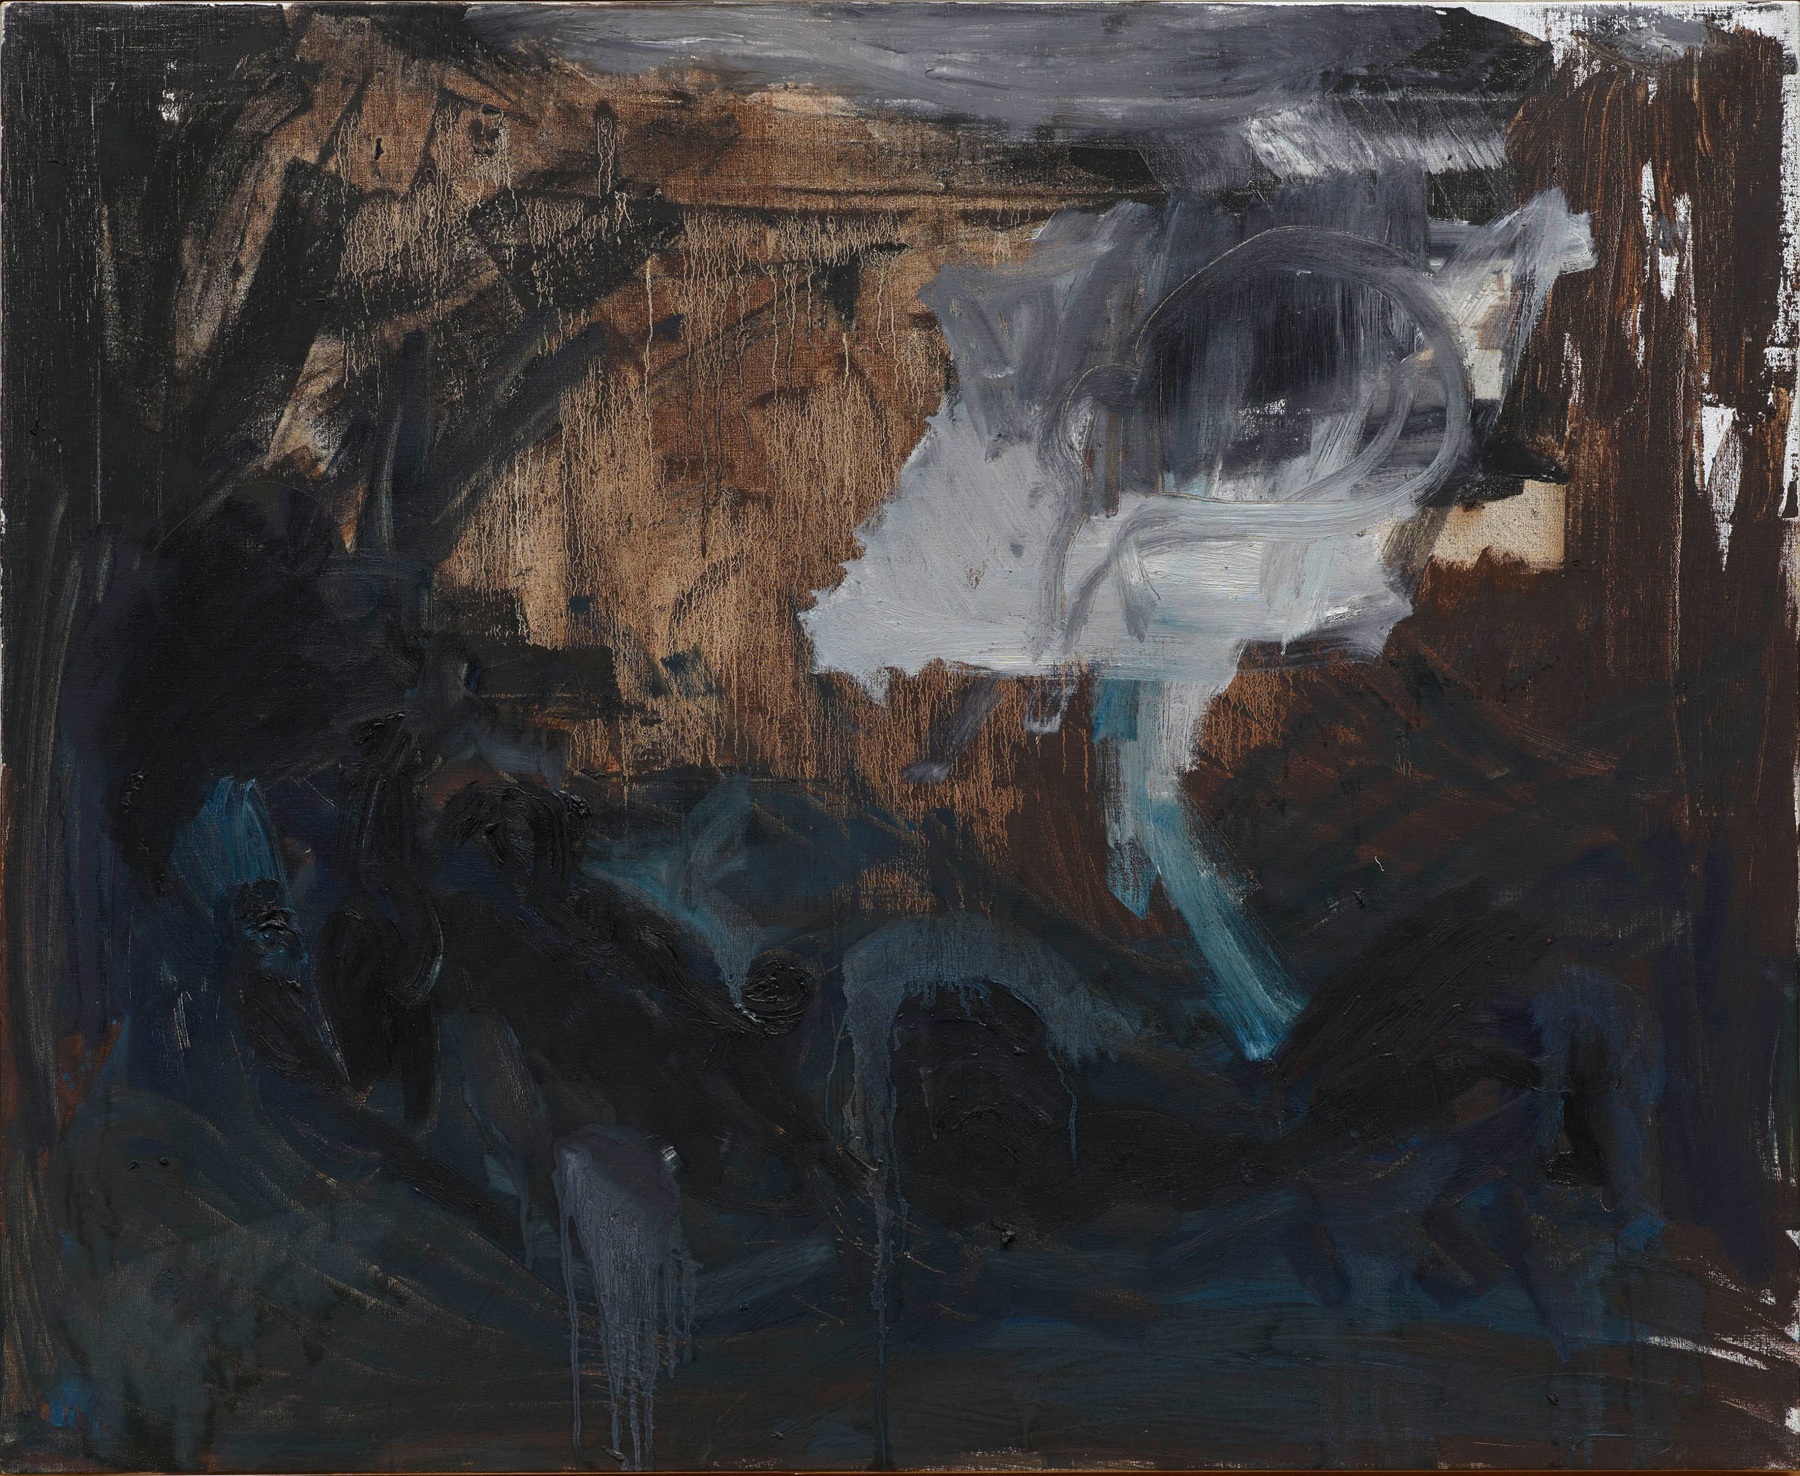 &quot;Untitled&quot;, 1981 Oil on canvas